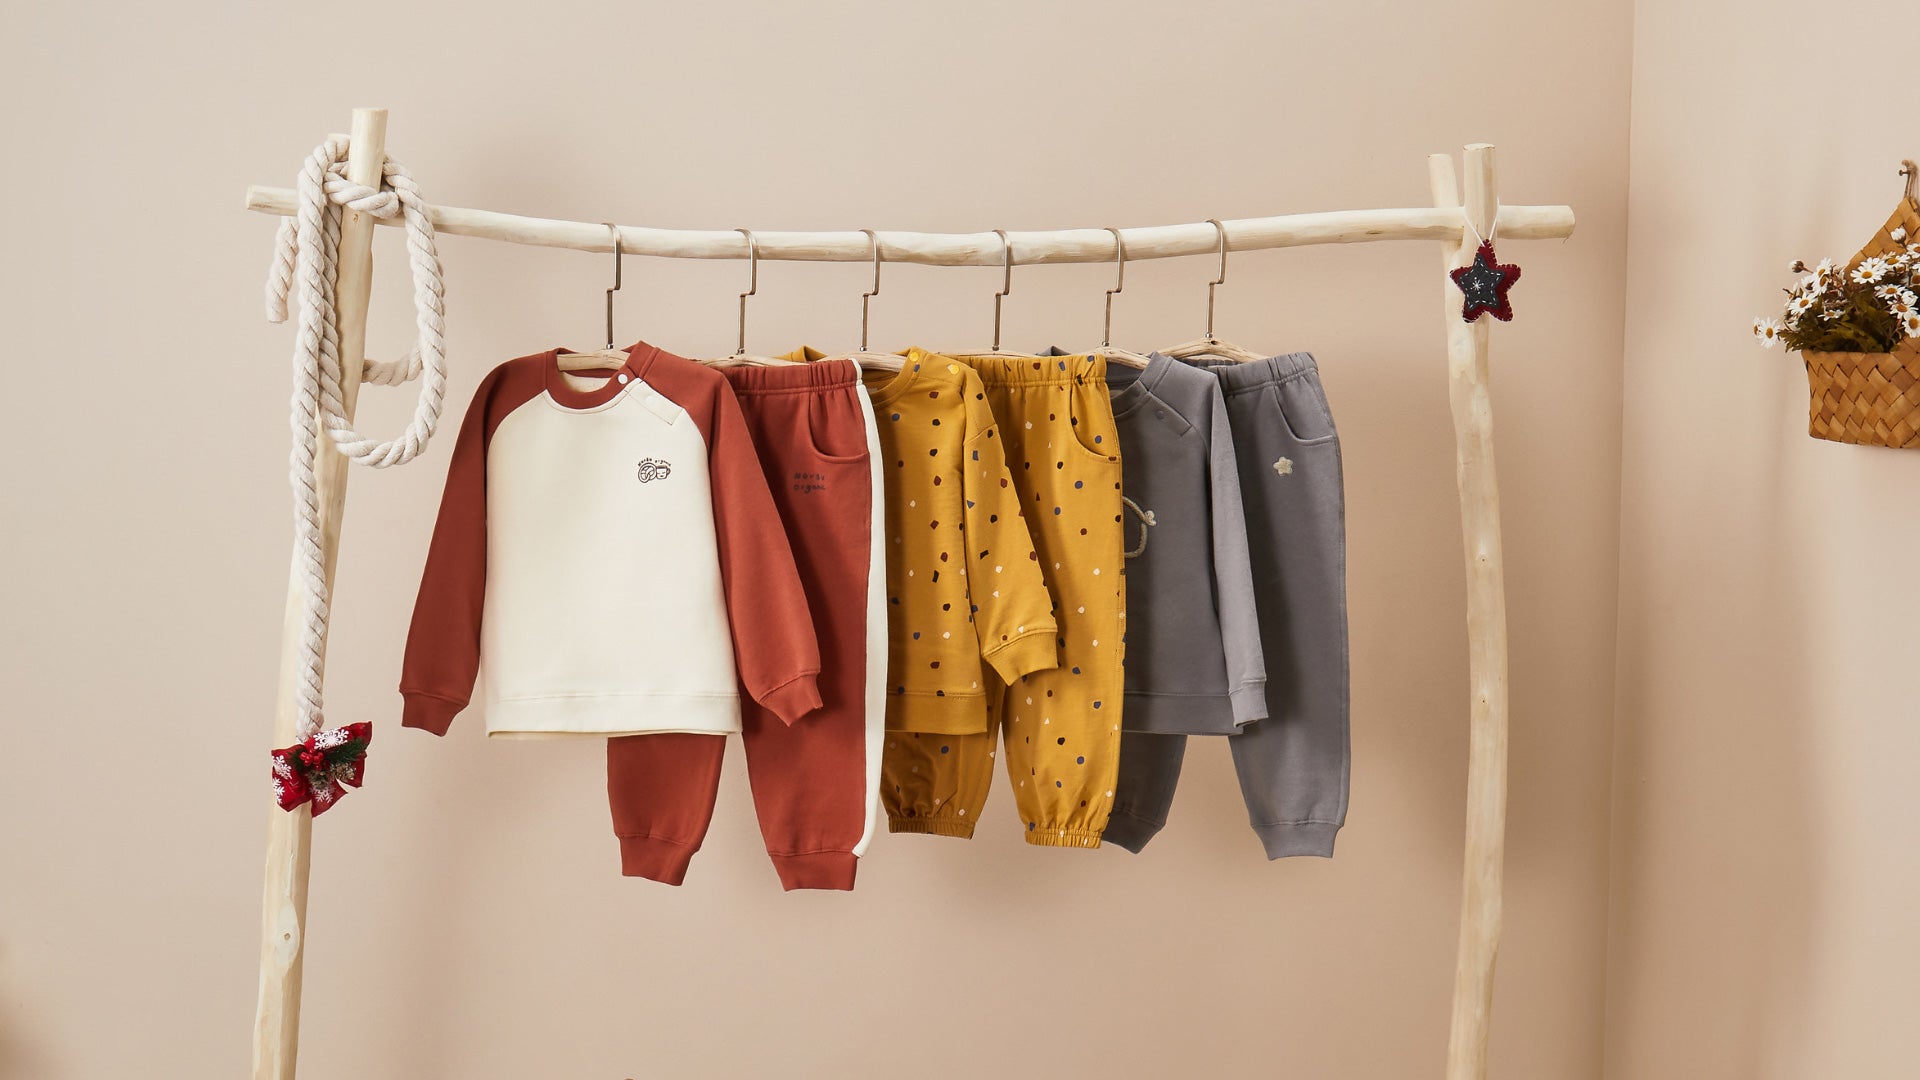 Organic Kids toddler Baby Clothes. Cool Kidswear.Timeless Design, Never go out of day -Norsu Organic